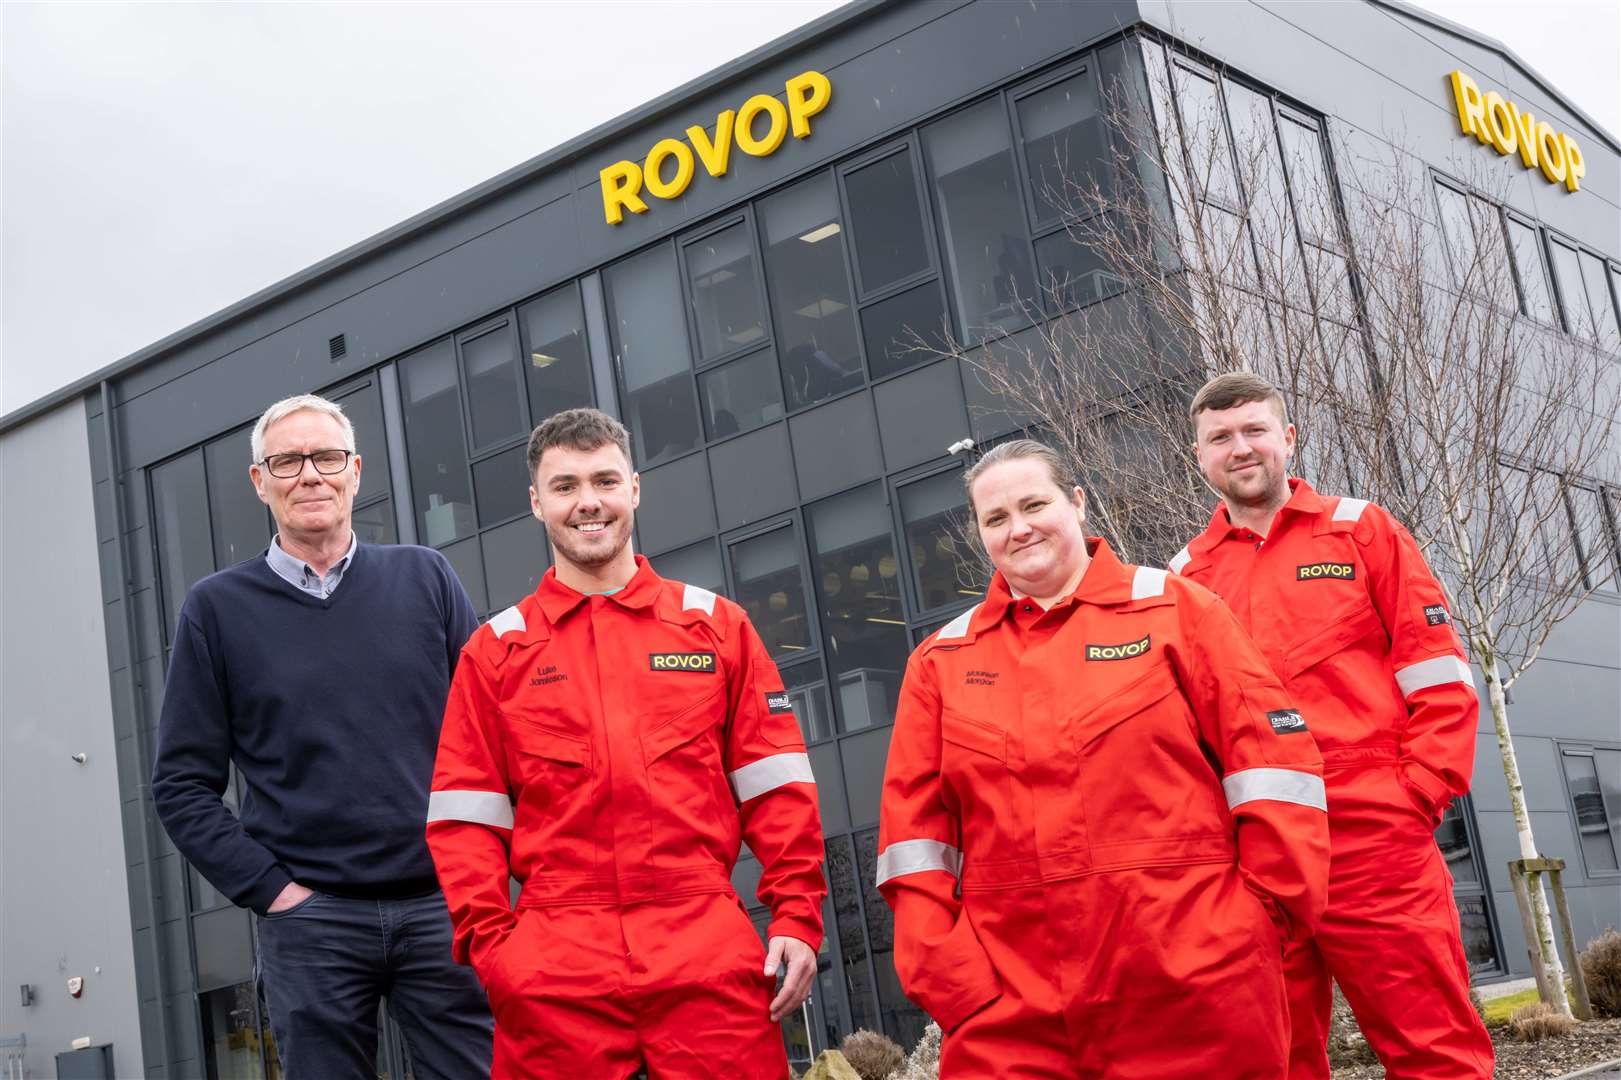 ROVOP has welcomed three new trainees.